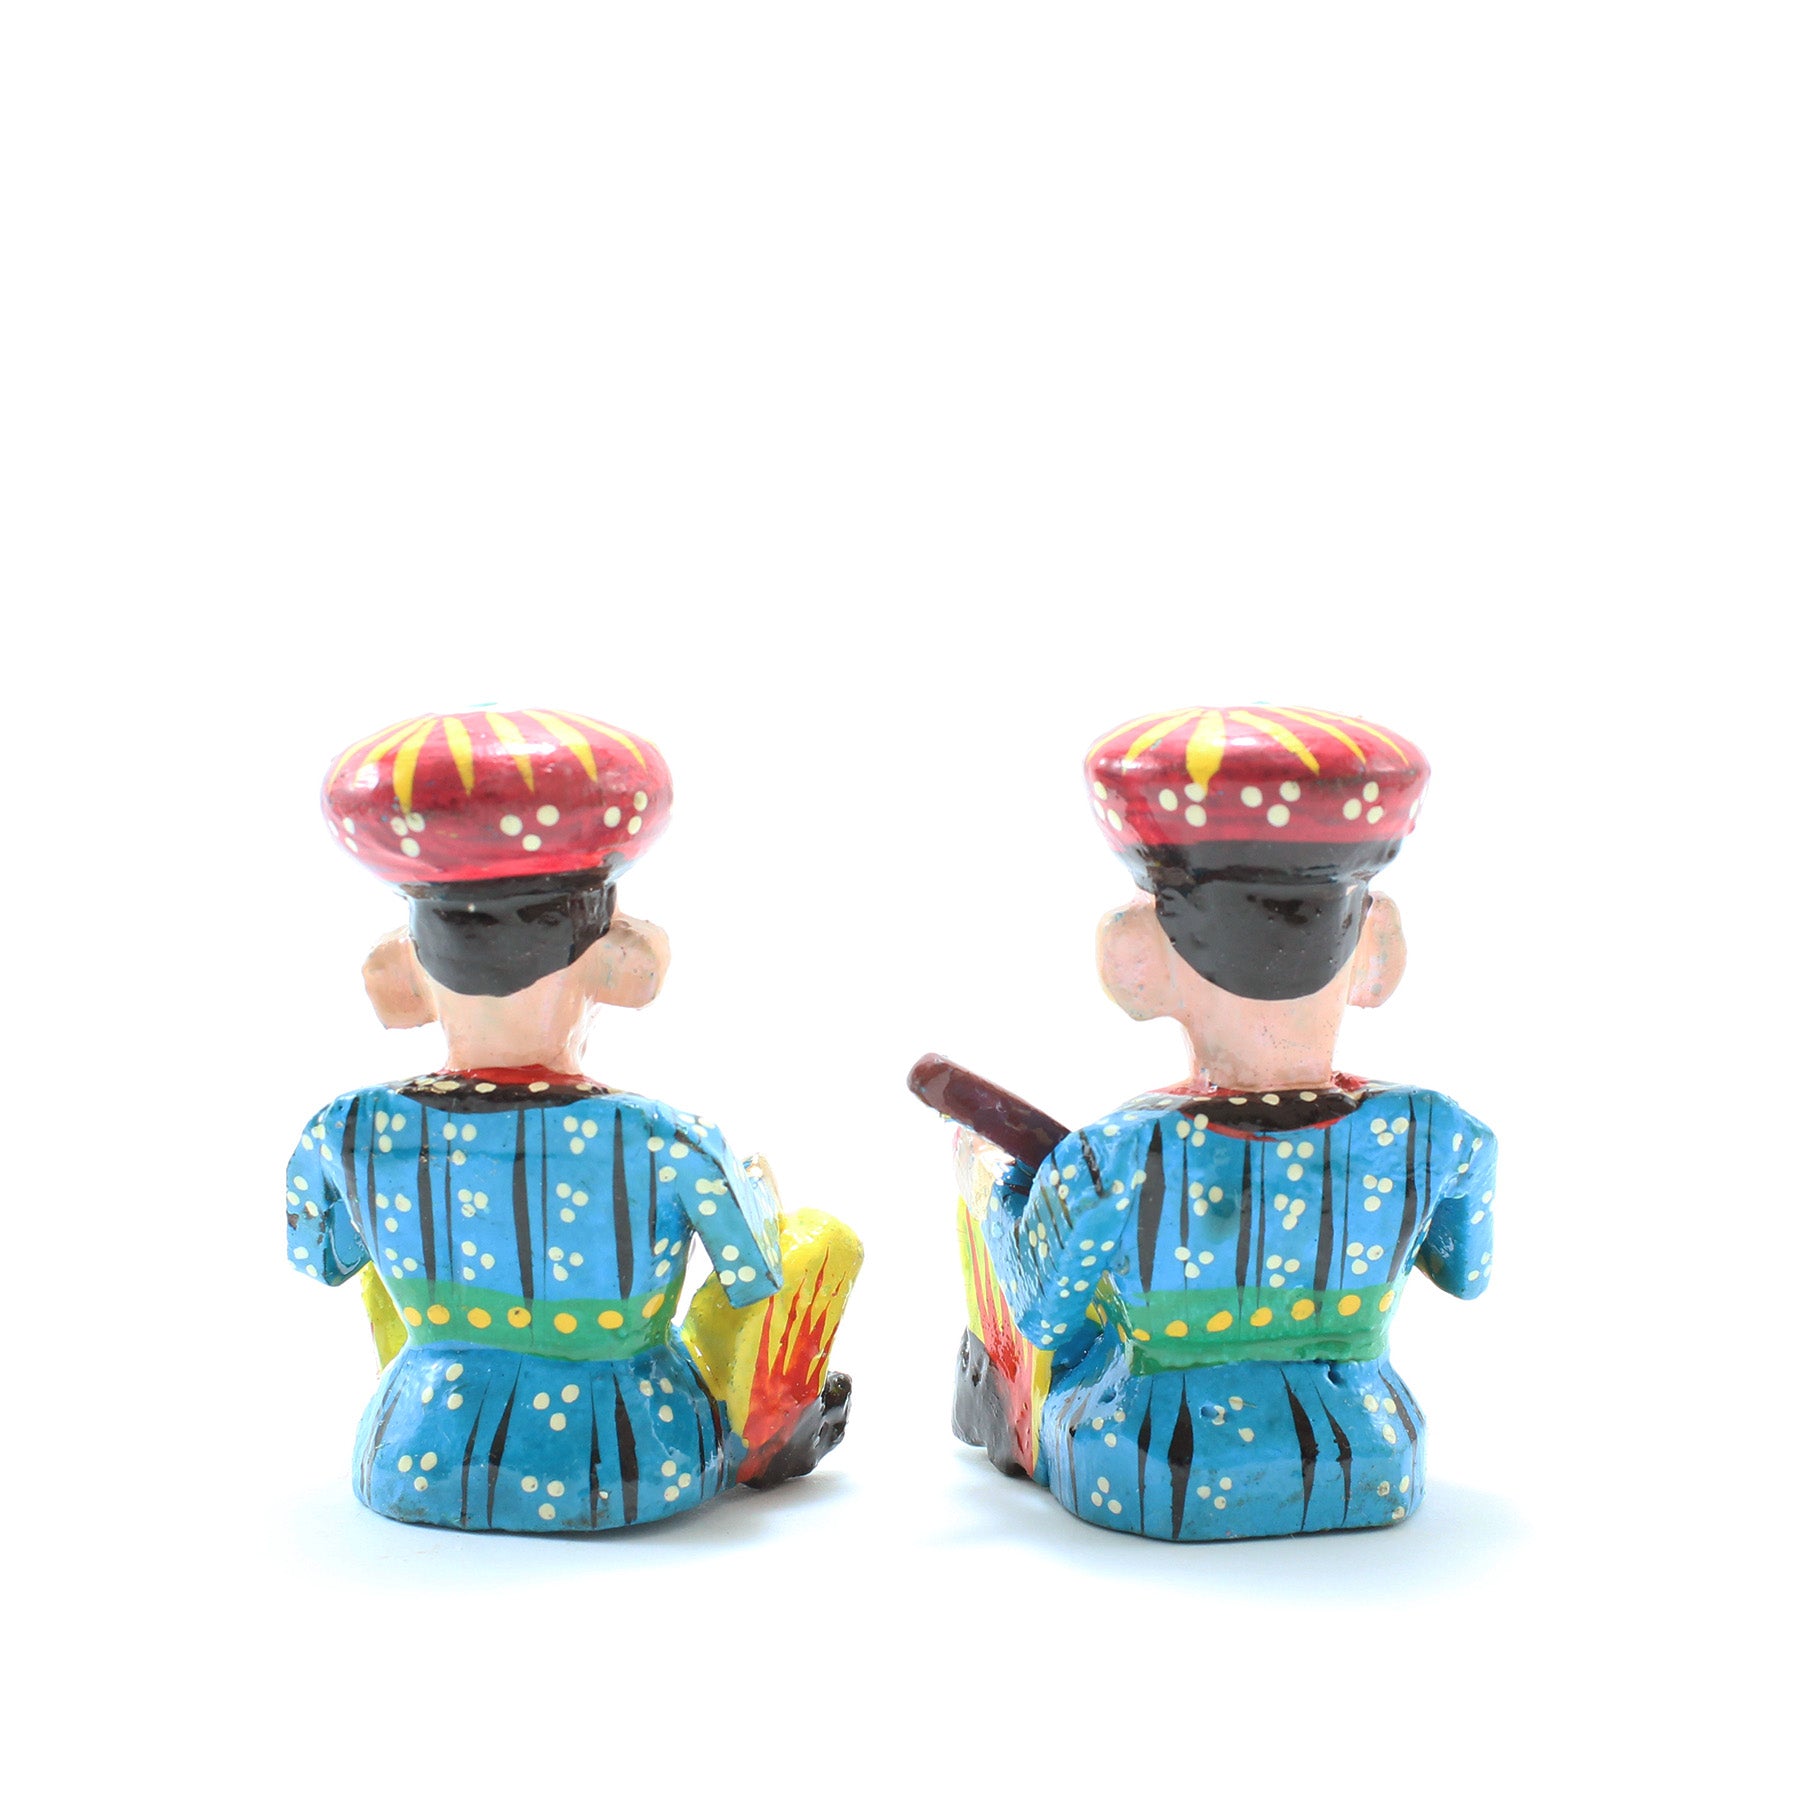 Rajasthani Bawla Pair of Wooden Musicians I